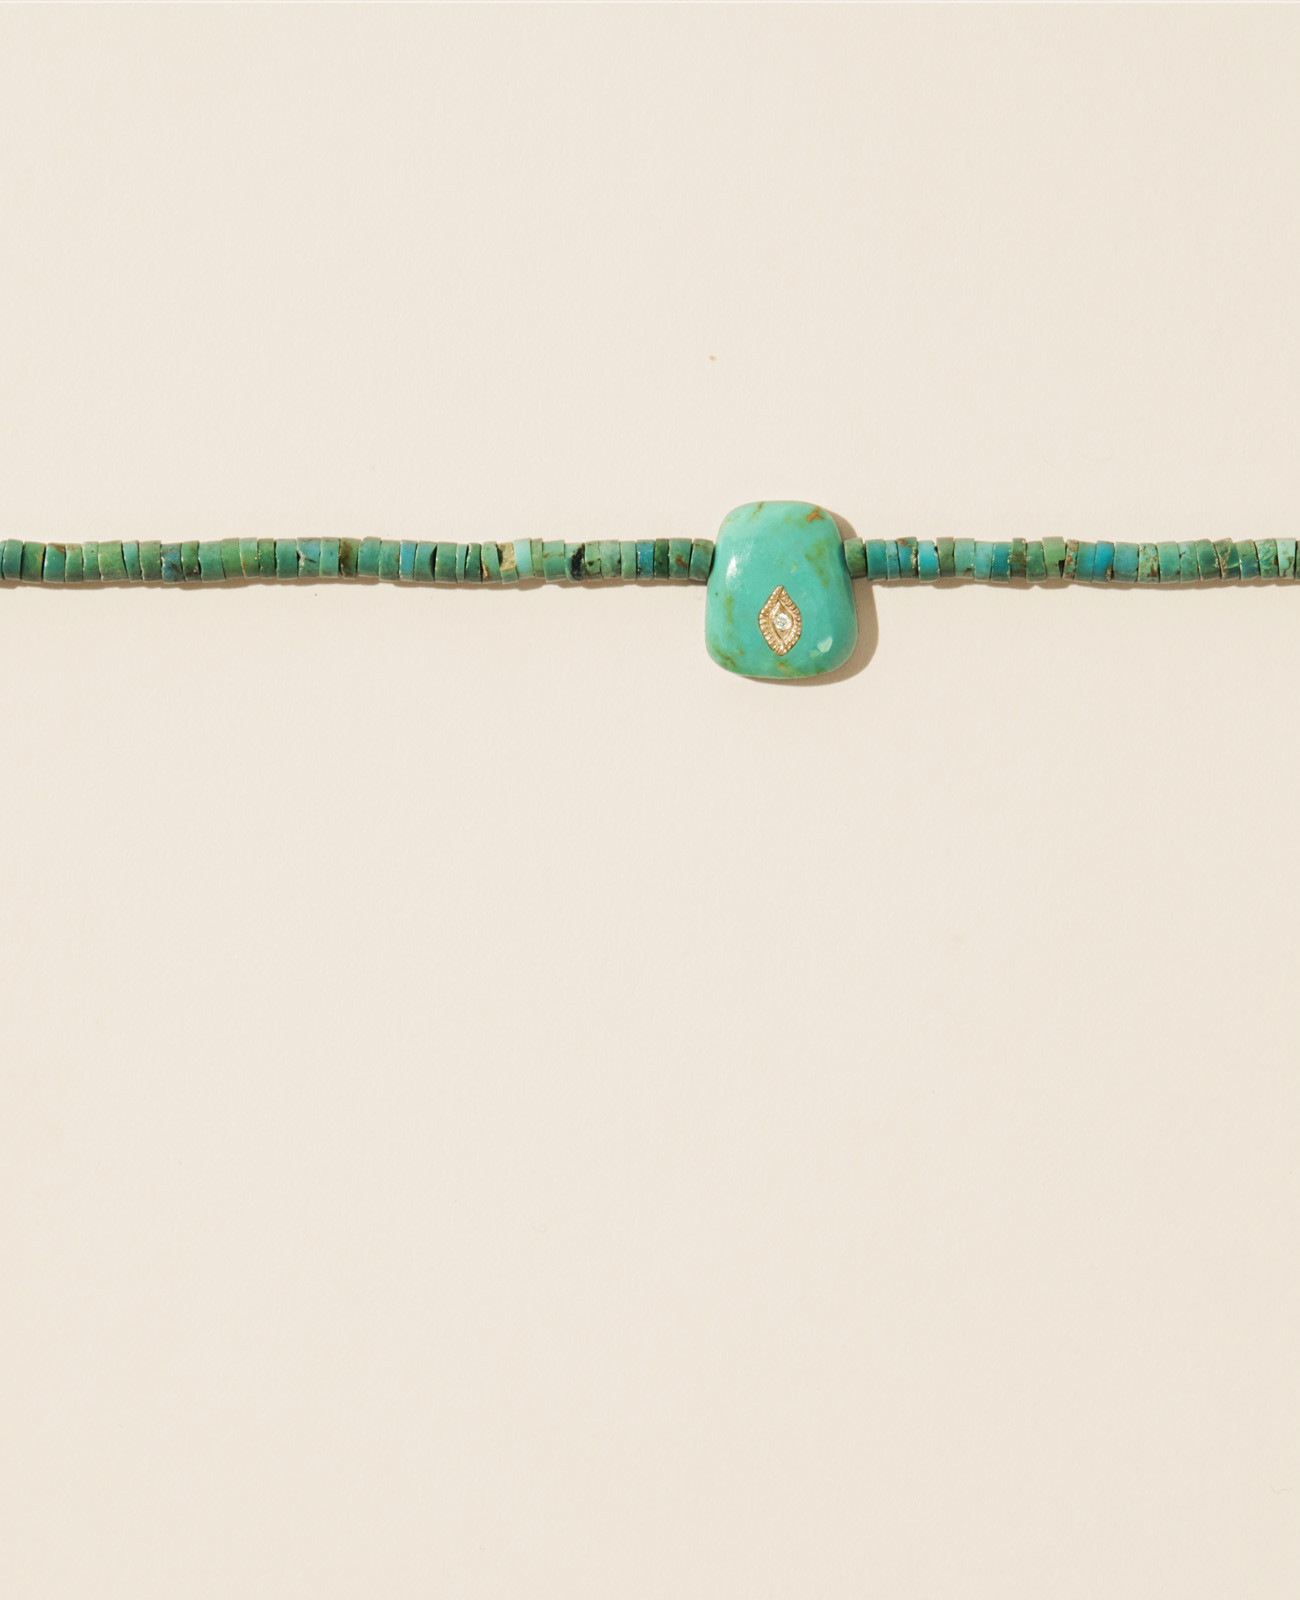 TAYLOR N°2 TURQUOISE necklace pascale monvoisin jewelry paris